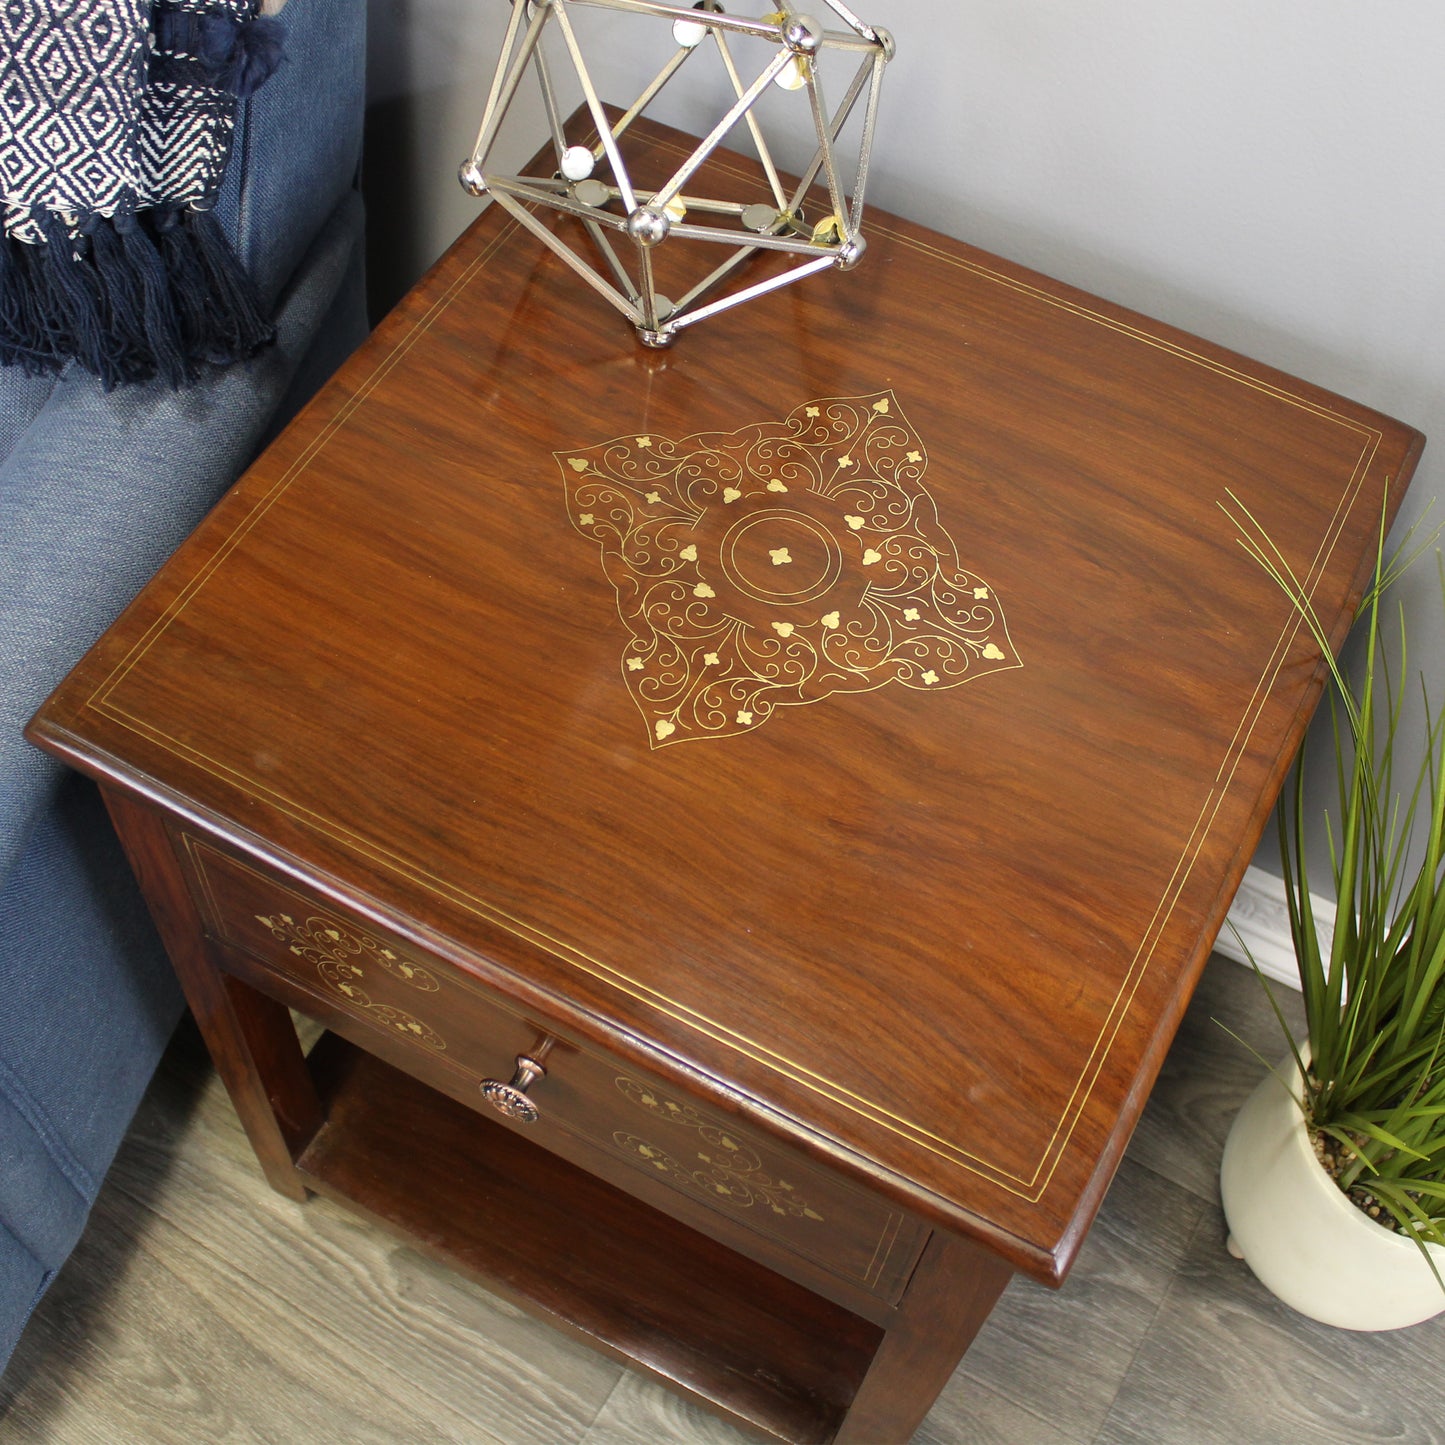 Natural Geo Decorative Rosewood Square Wooden End Table with Drawer